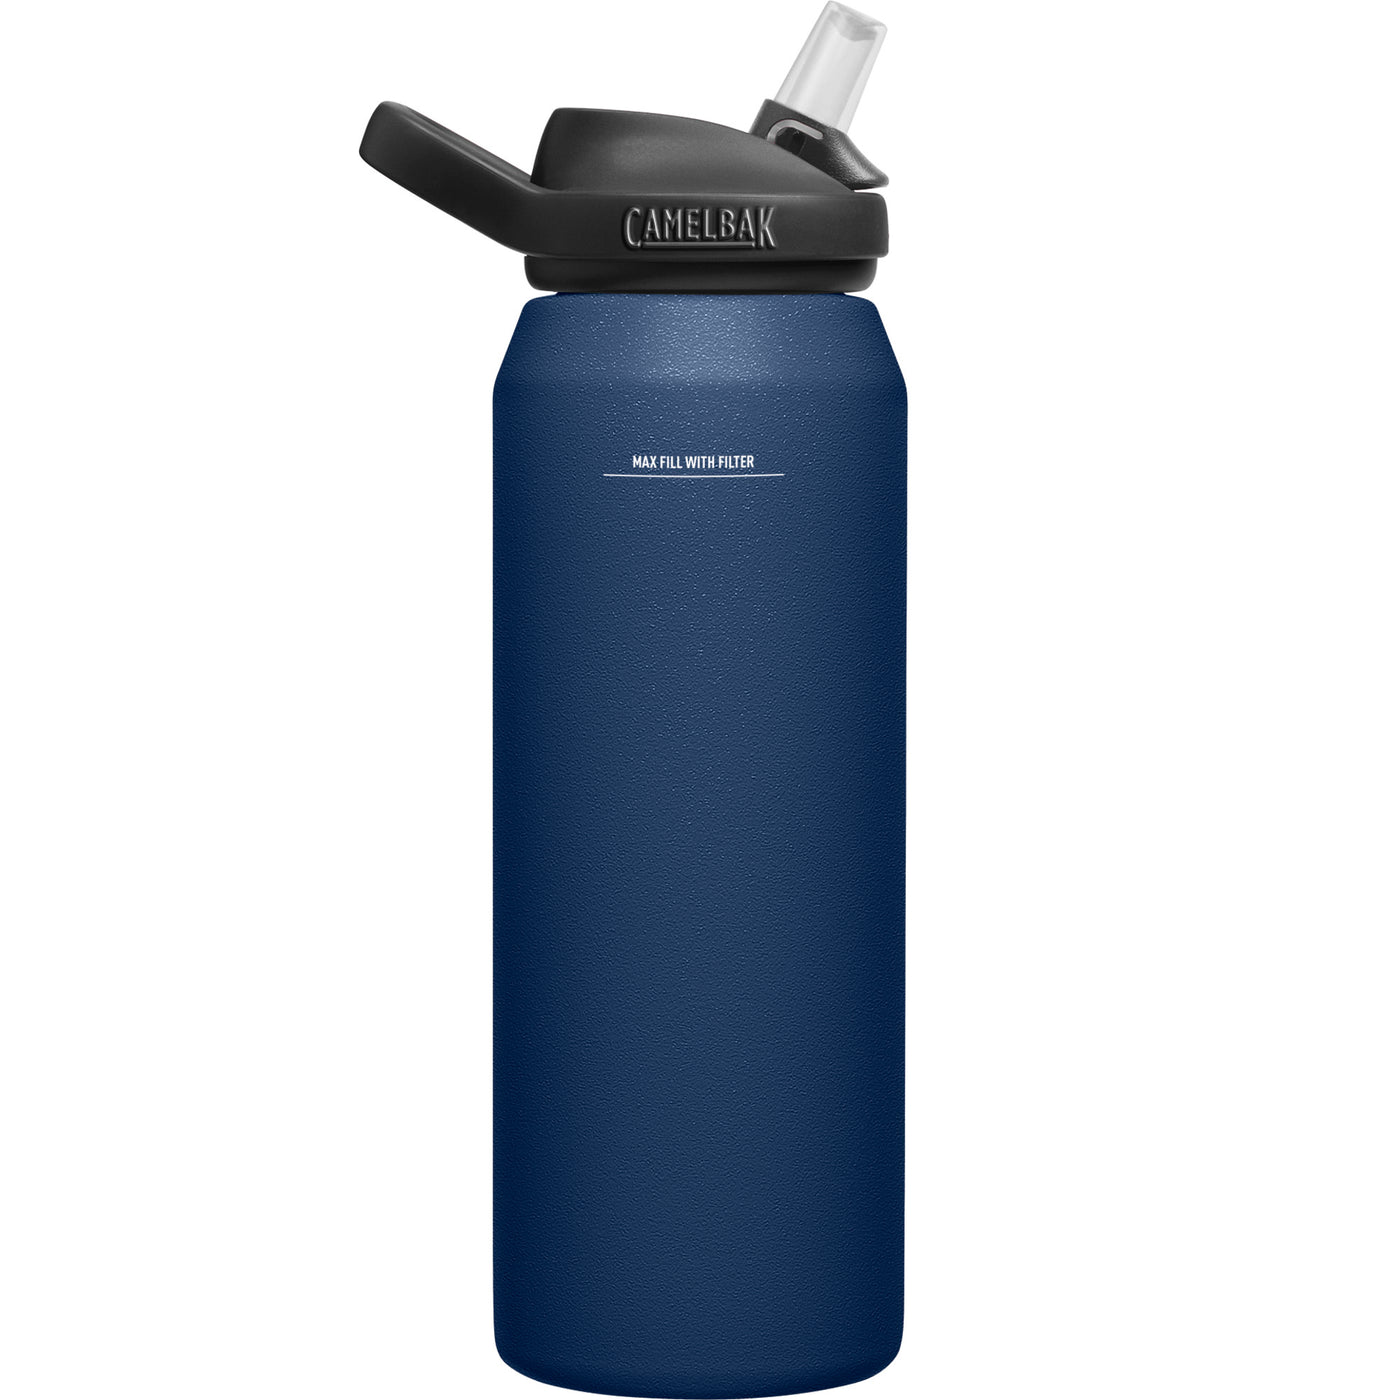 eddy+ Stainless Steel Vacuum Insulated filtered by LifeStraw